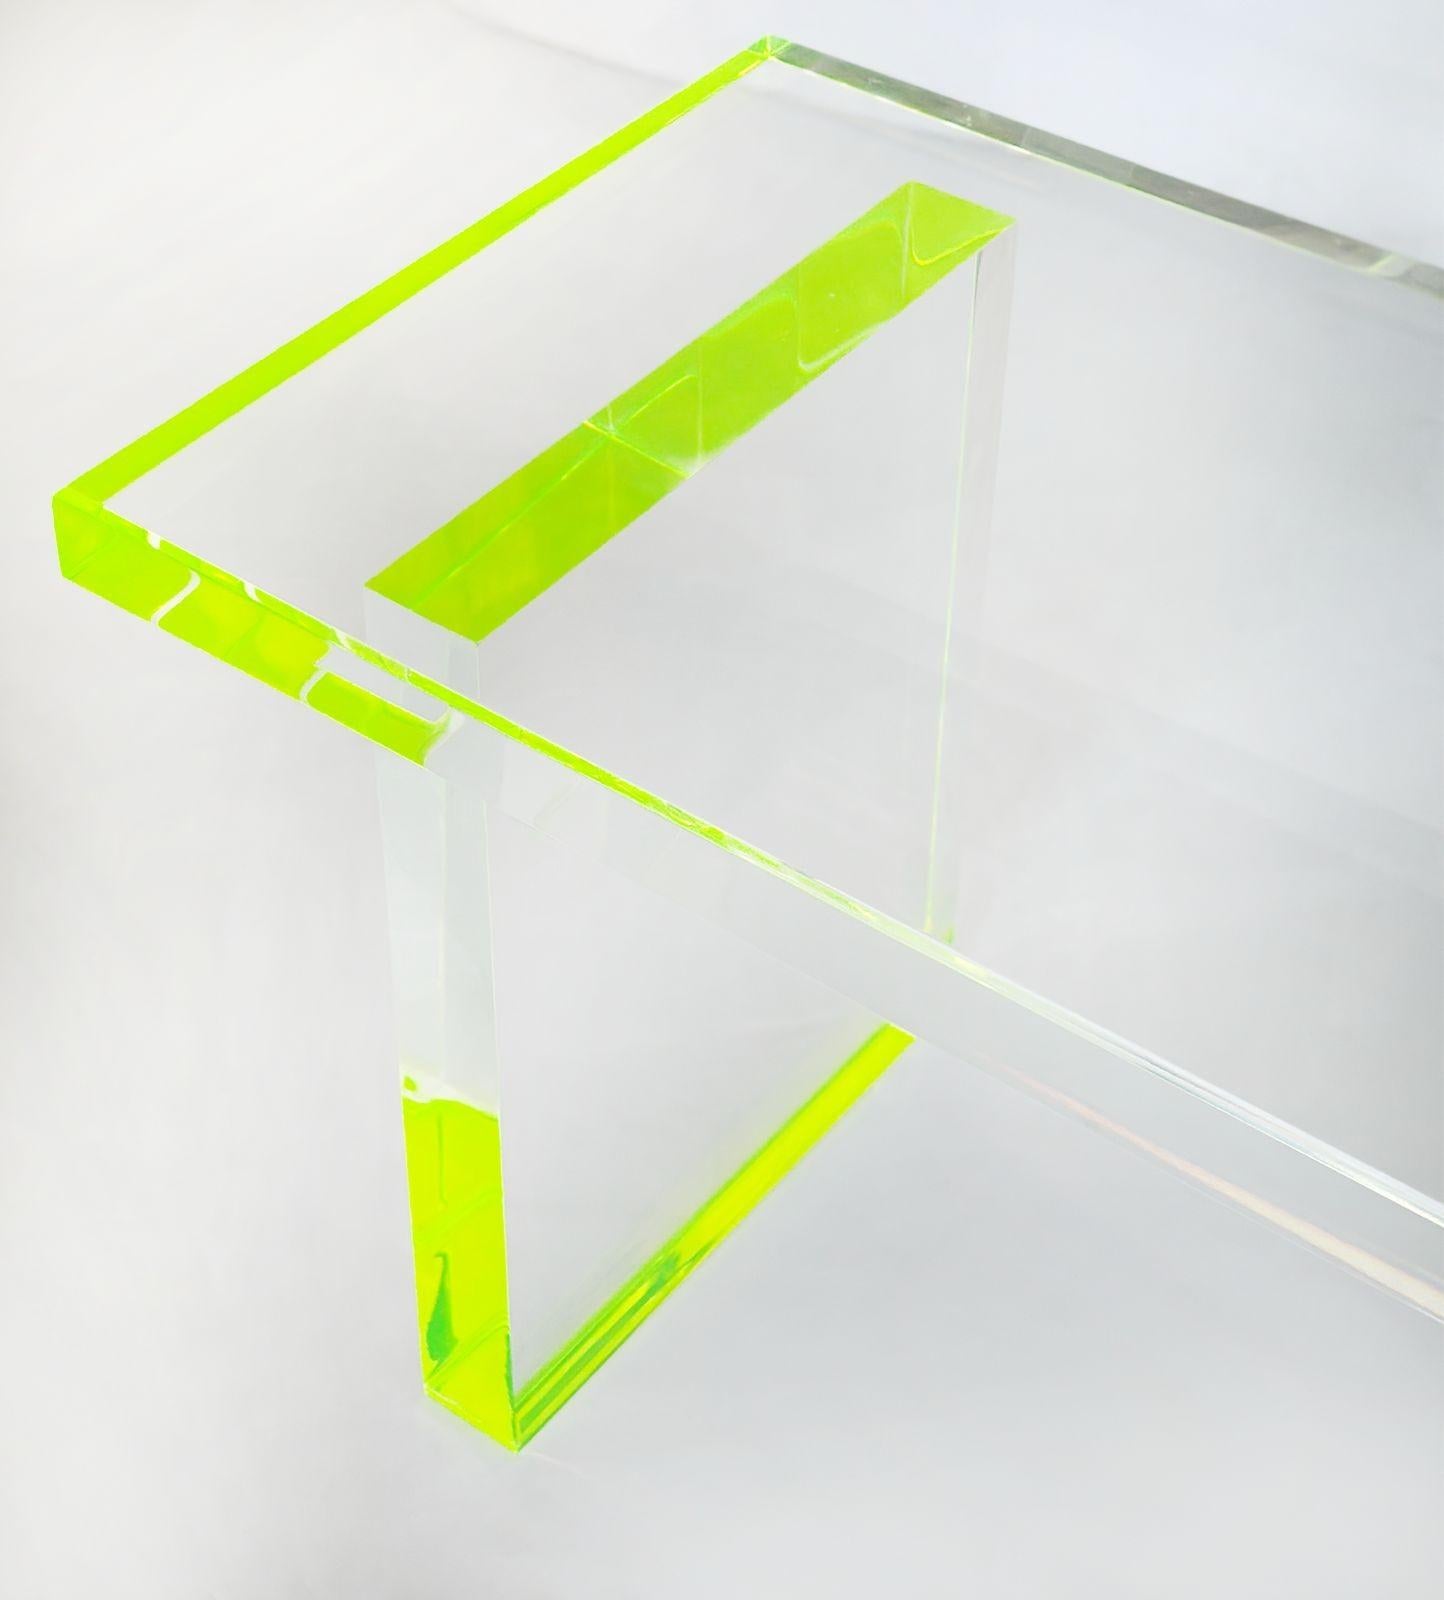 American Pair of Modern Lucite Benches w/ Fluorescent Green Details by Pegaso Gallery For Sale